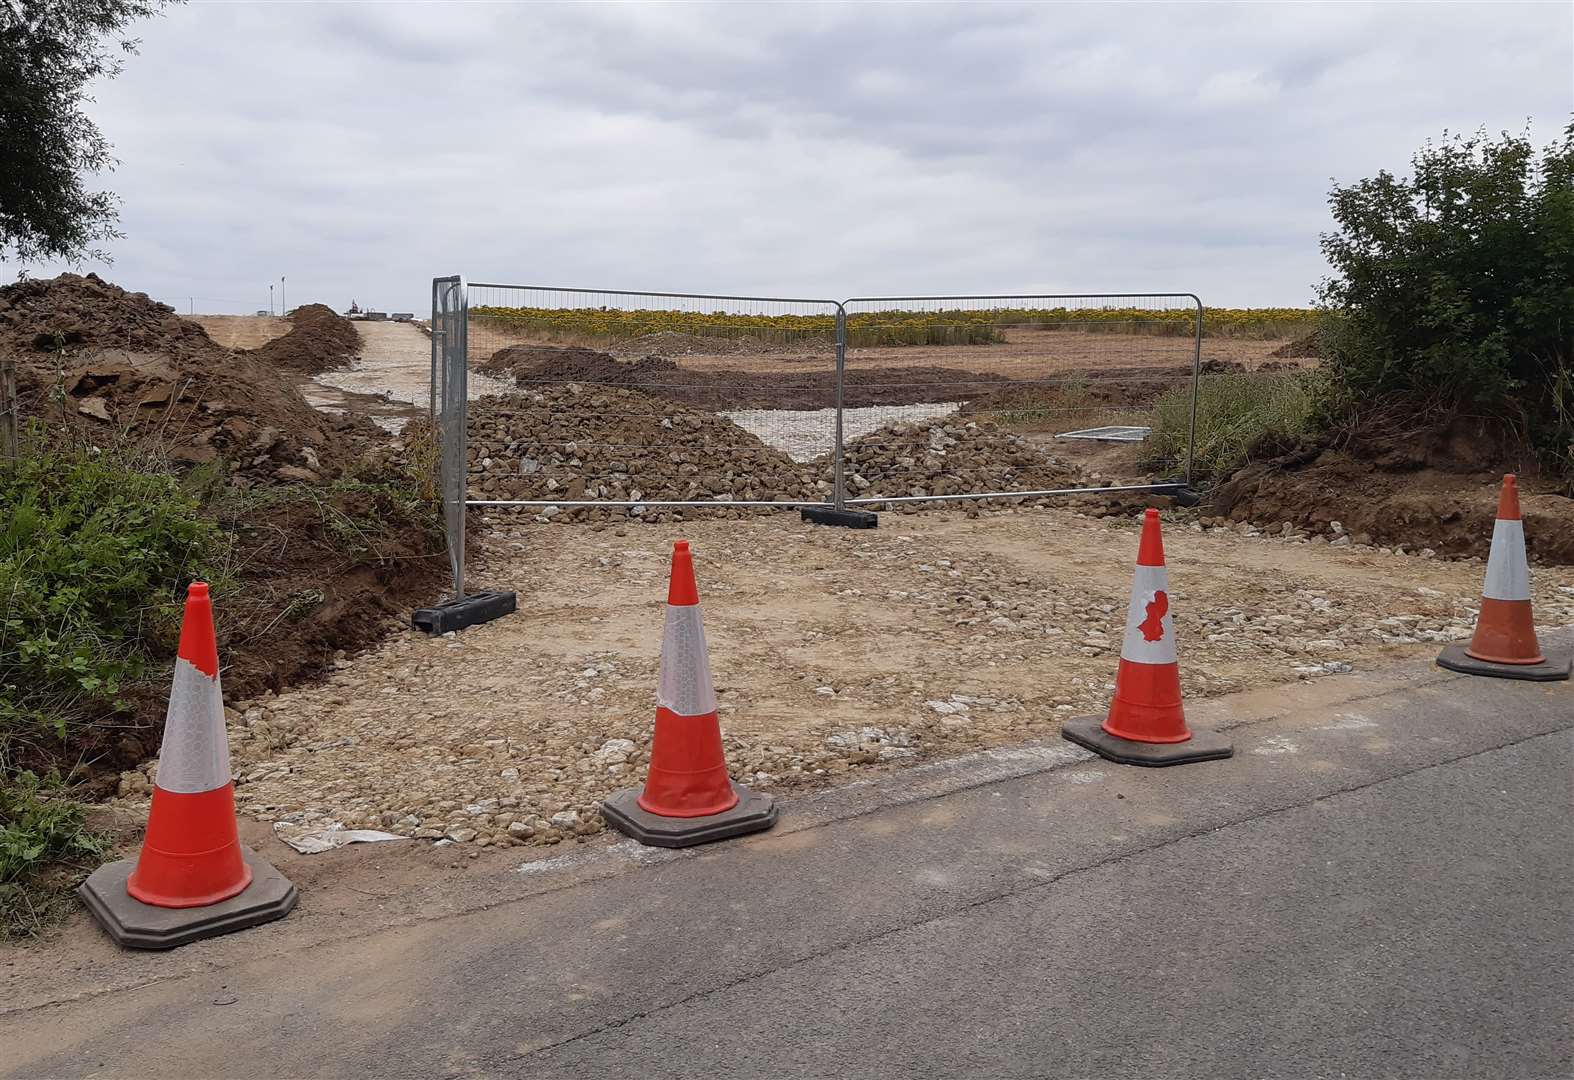 Part of a hedge was removed in July to make a temporary access point to the site